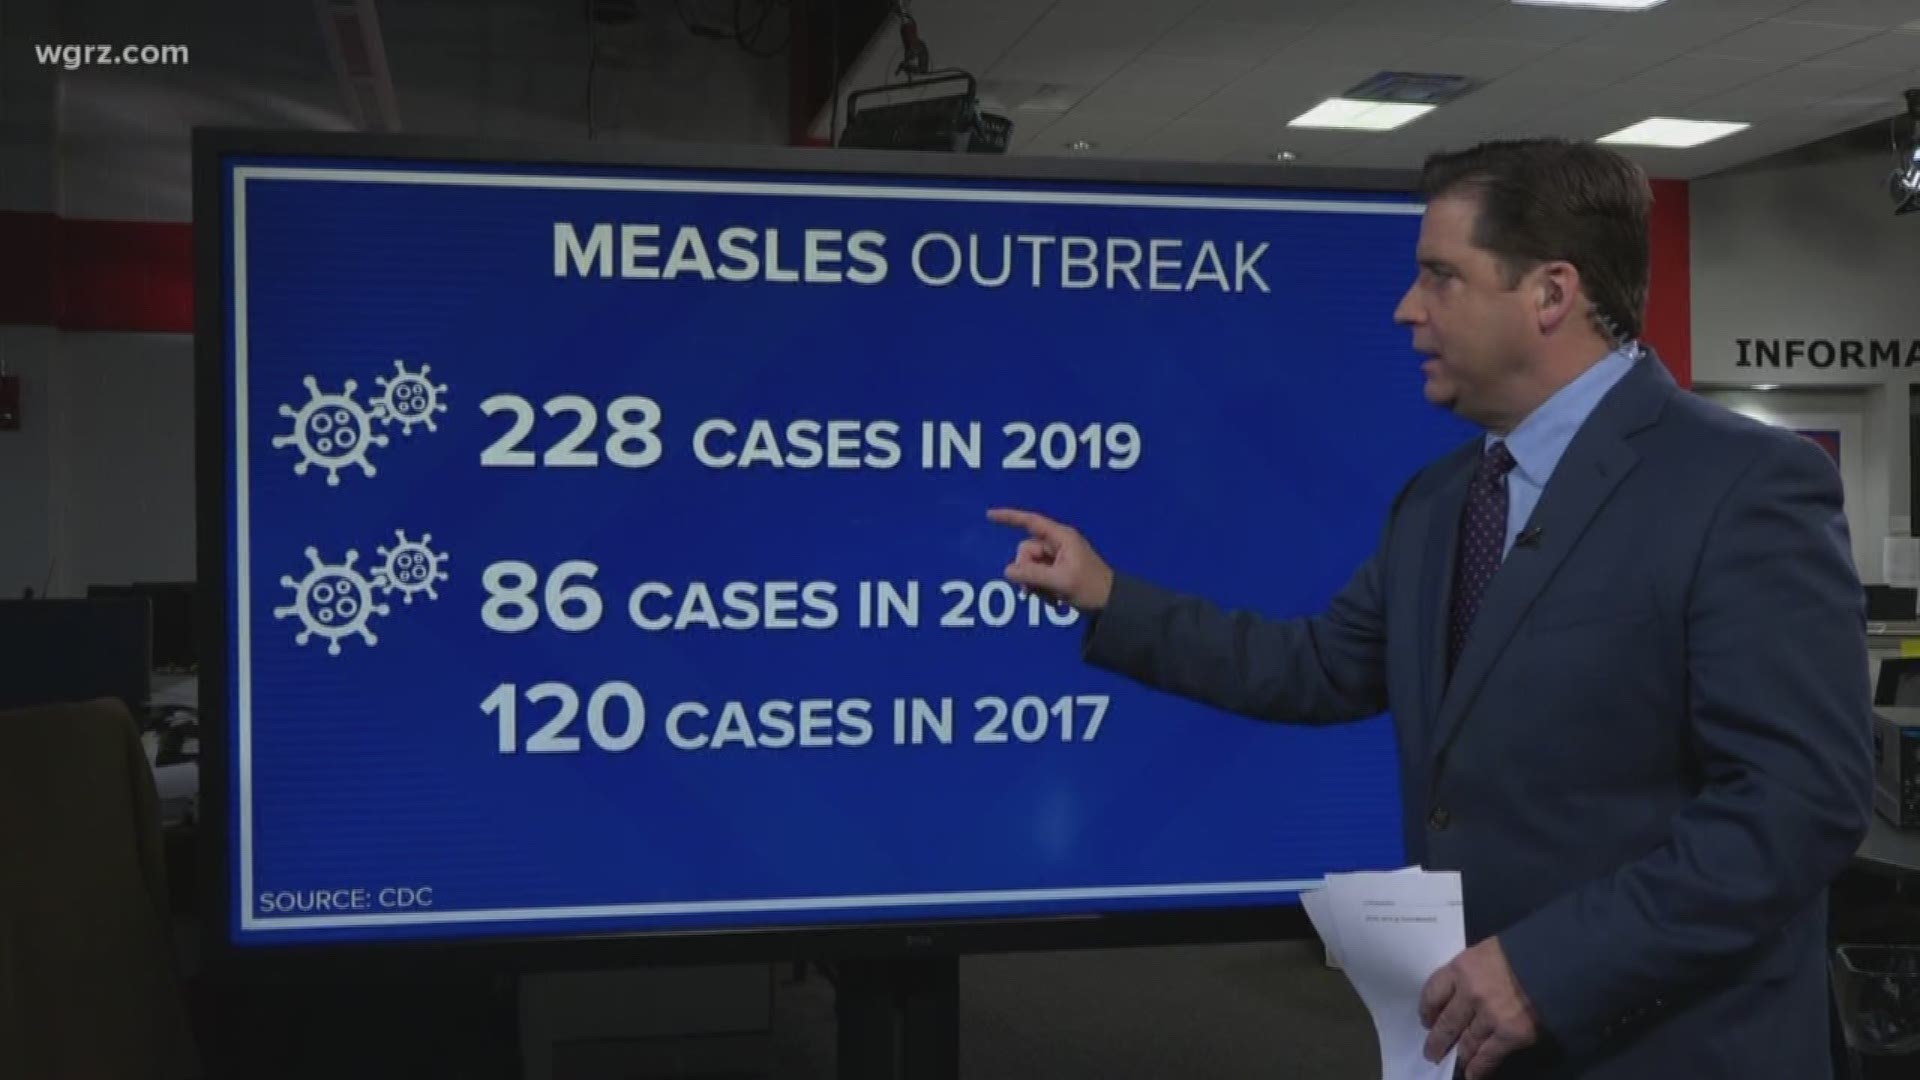 228 cases of measles have be reported in the United States since January 1st